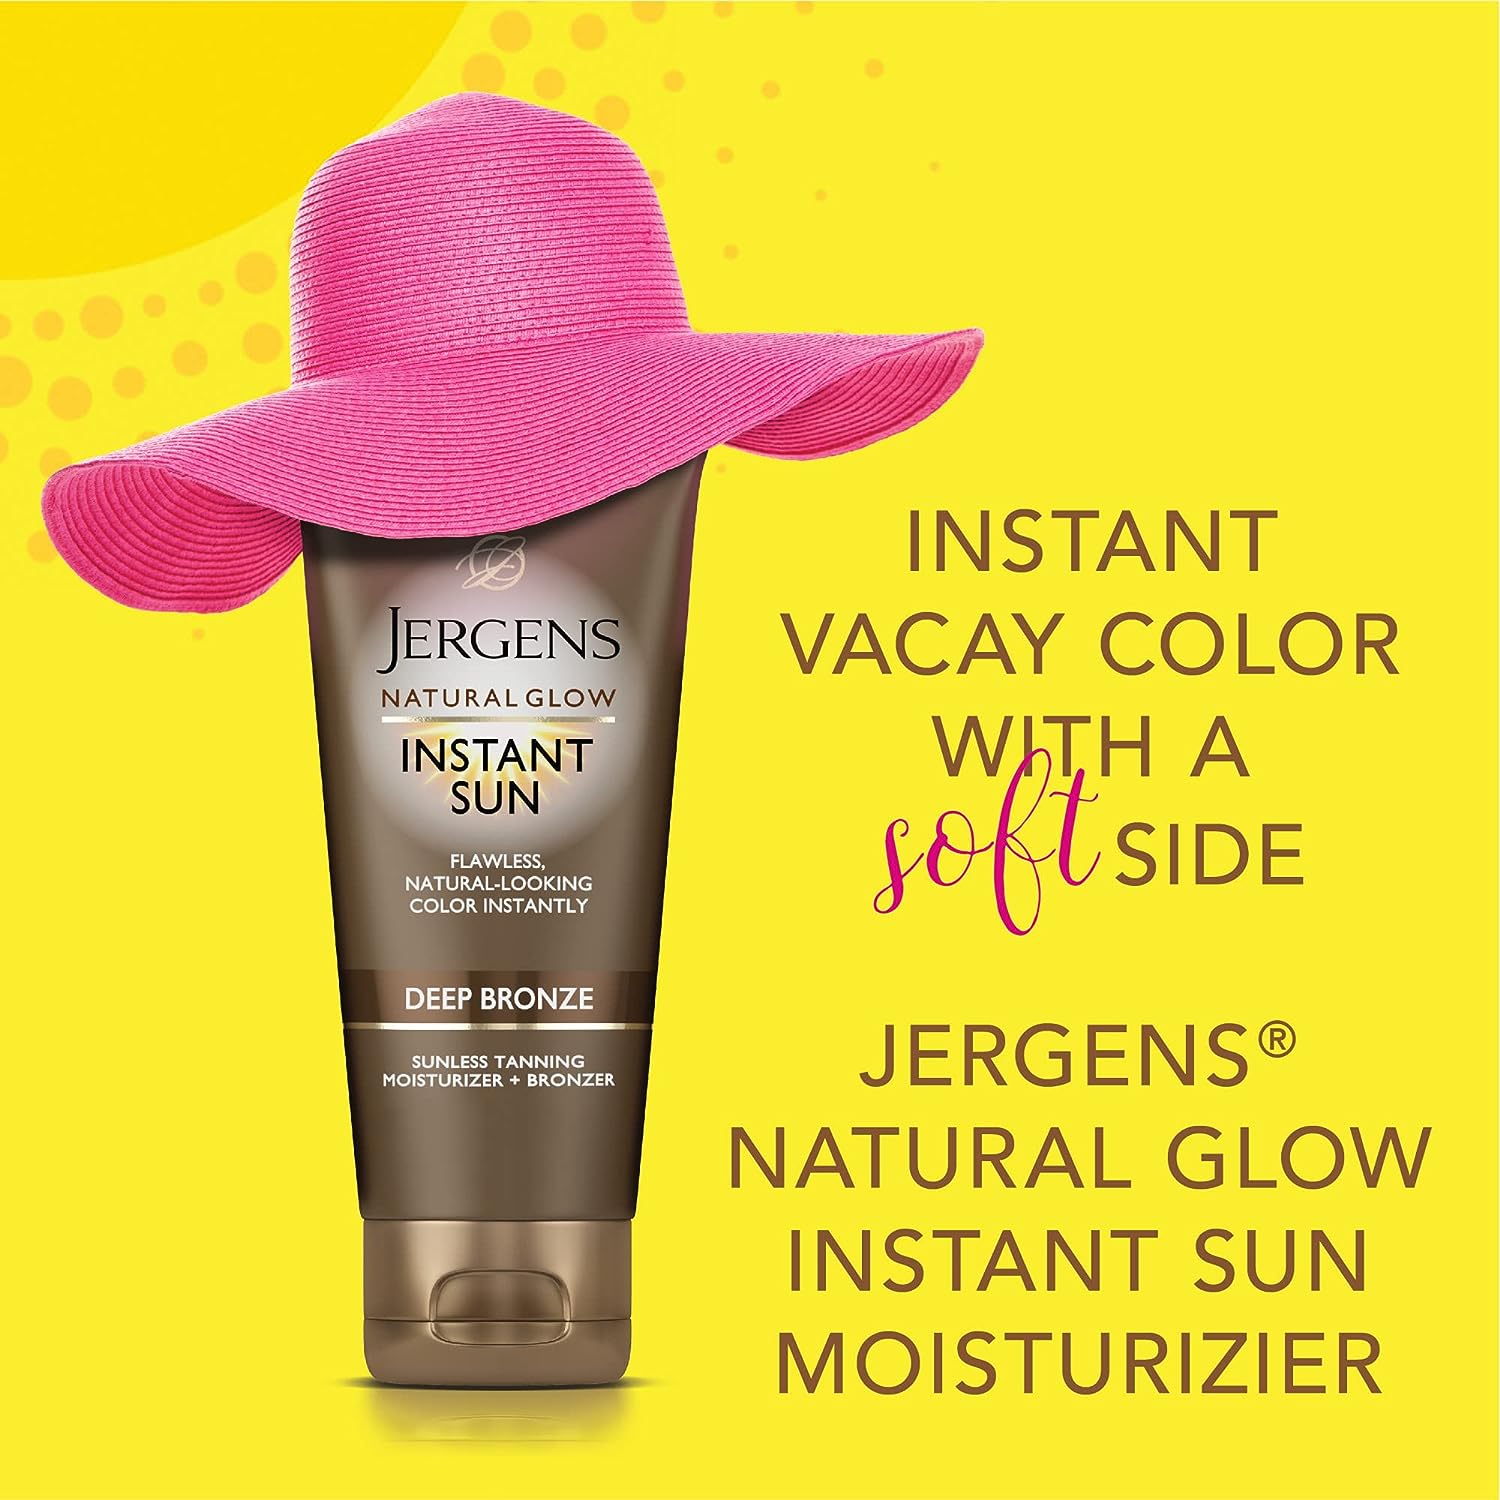 Jergens Natural Glow Instant Sun Sunless Tanning Moisturizer + Bronzer, Self Tanner, Deep Bronze, for Natural-Looking Tan, 6 Ounce : Beauty & Personal Care